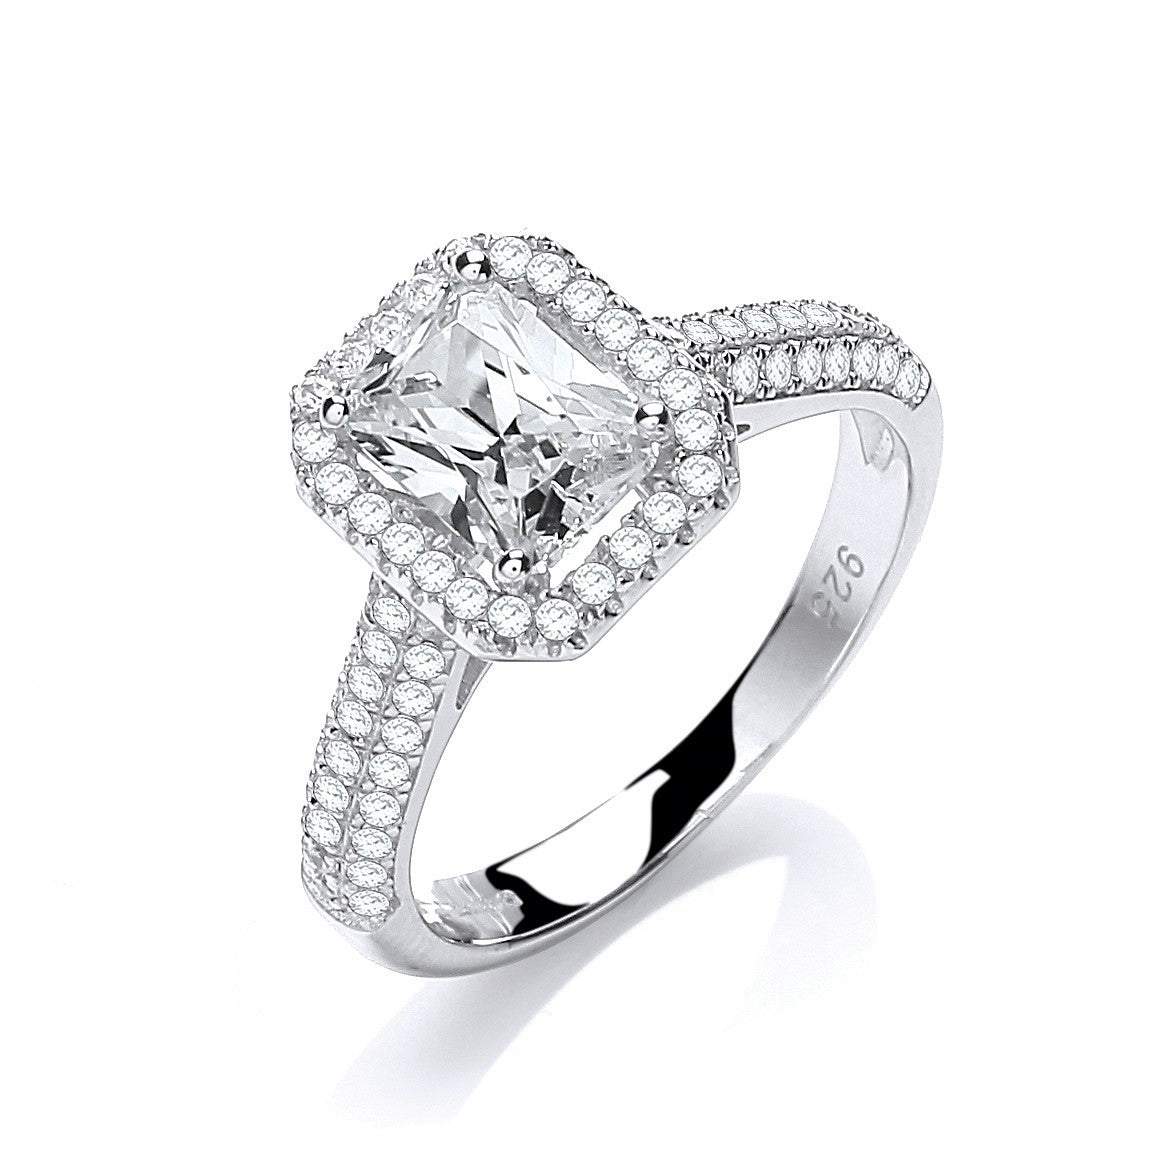 Micro Pave' Emerald Cut Centre with Shoulder Cubic Zirconia's Ring